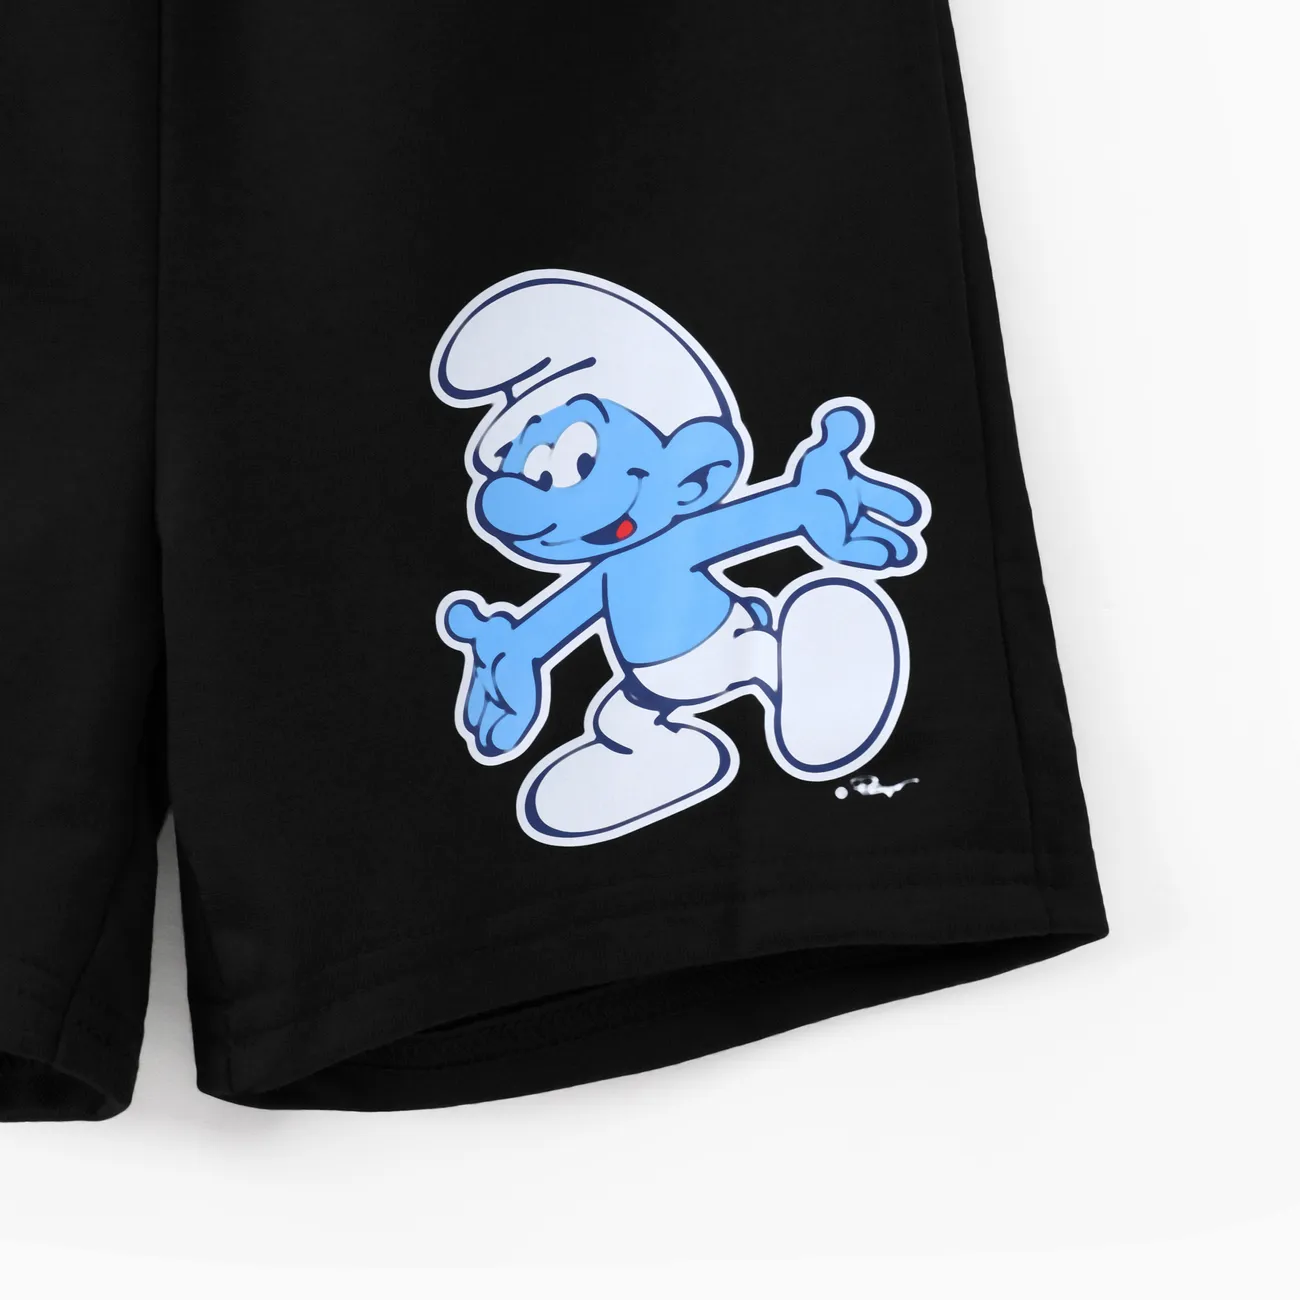 The Smurfs Toddler Boys 2pcs Character Print Tee with Shorts Set Blue big image 1